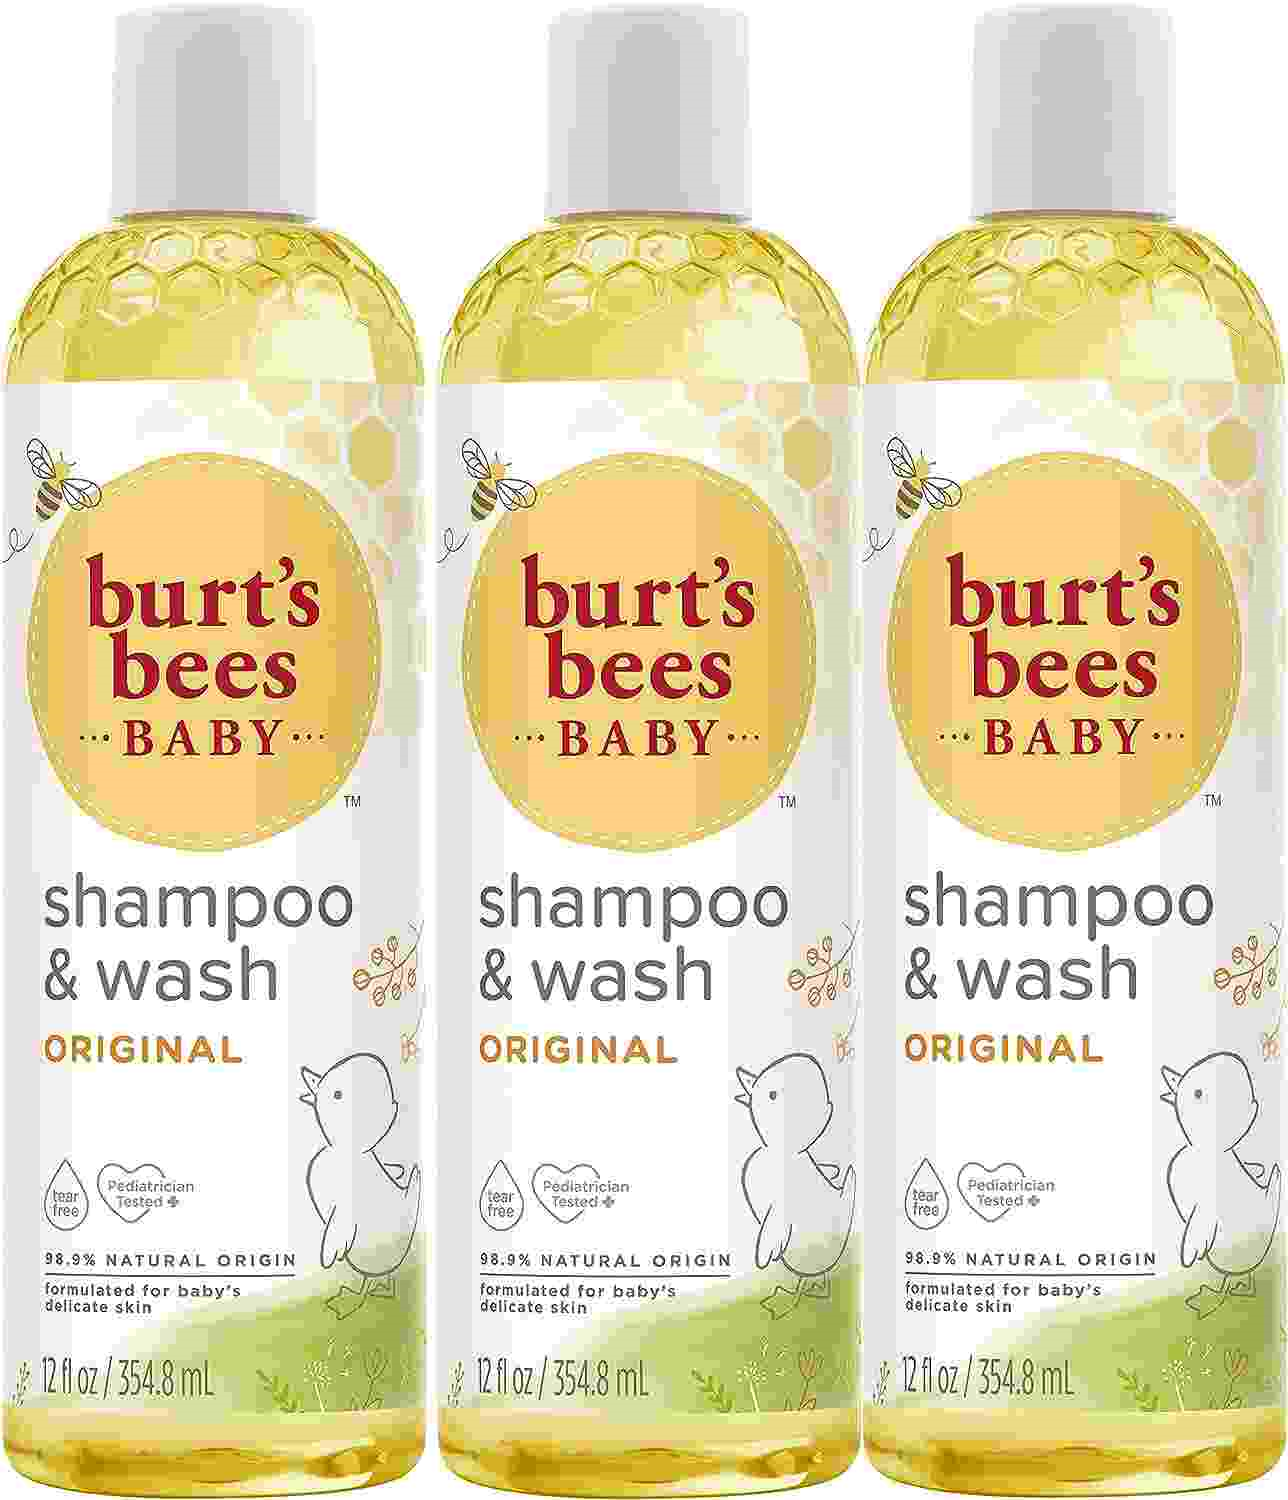 15 Best Natural Hair Products for Black Babies